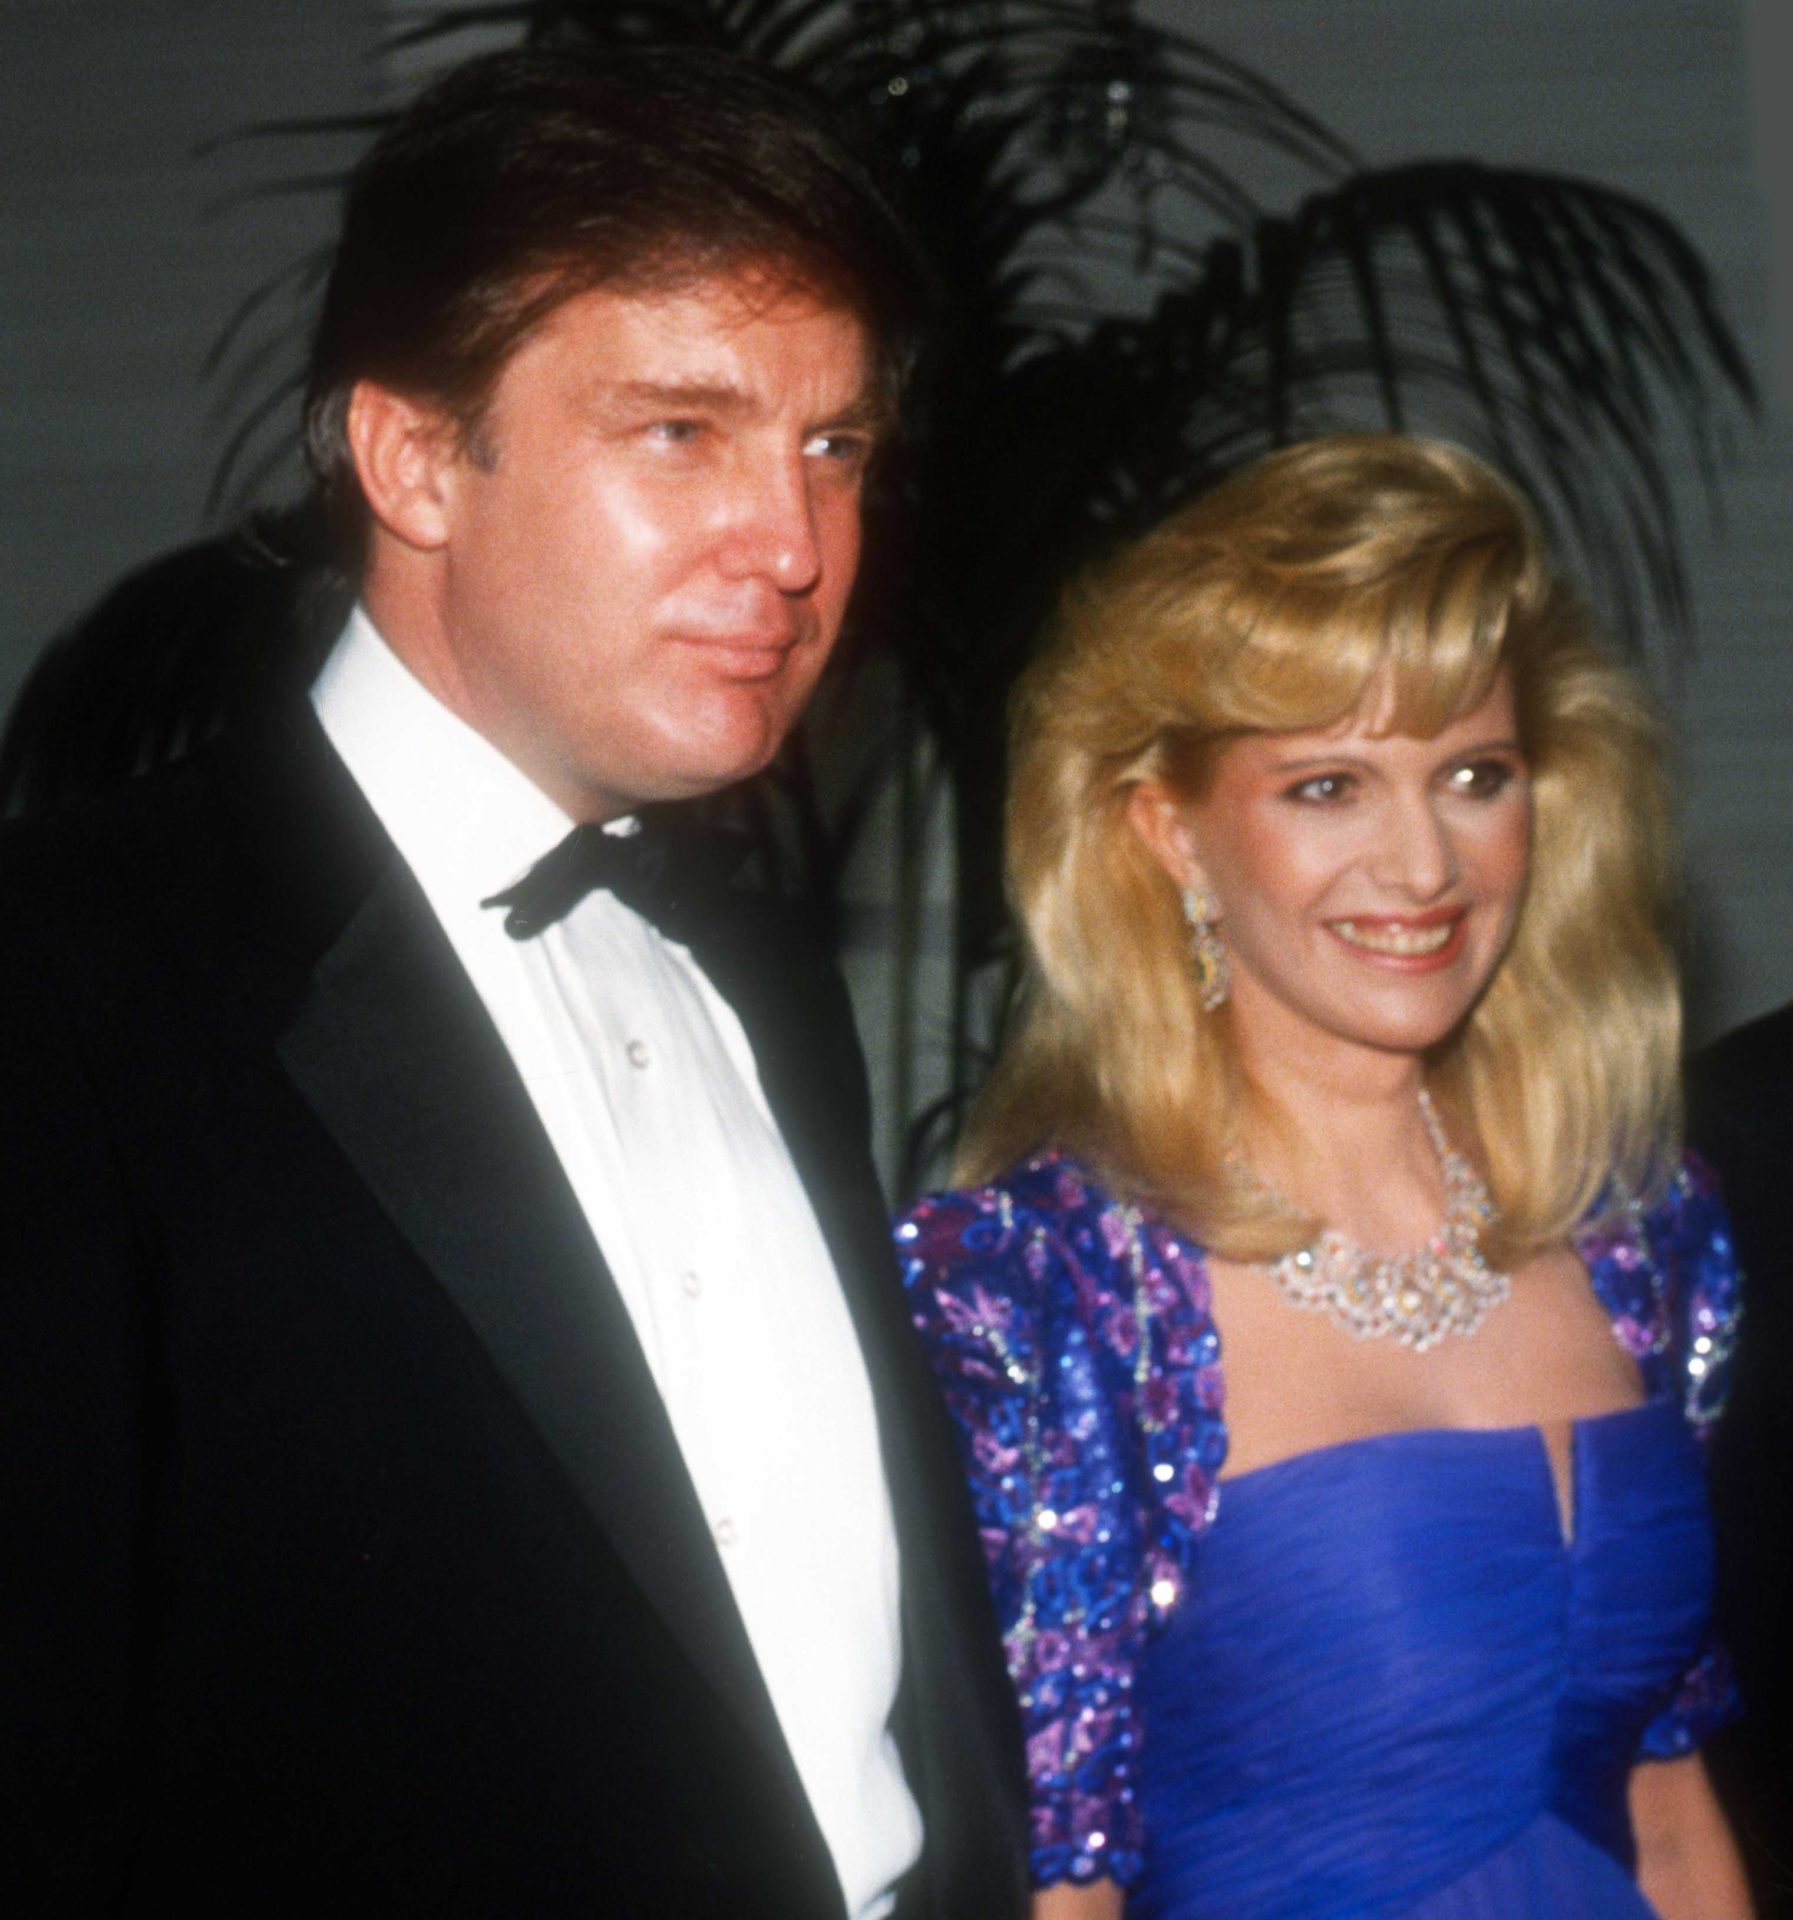 Ivana Trump and Donald Trump are seen in an undated photo